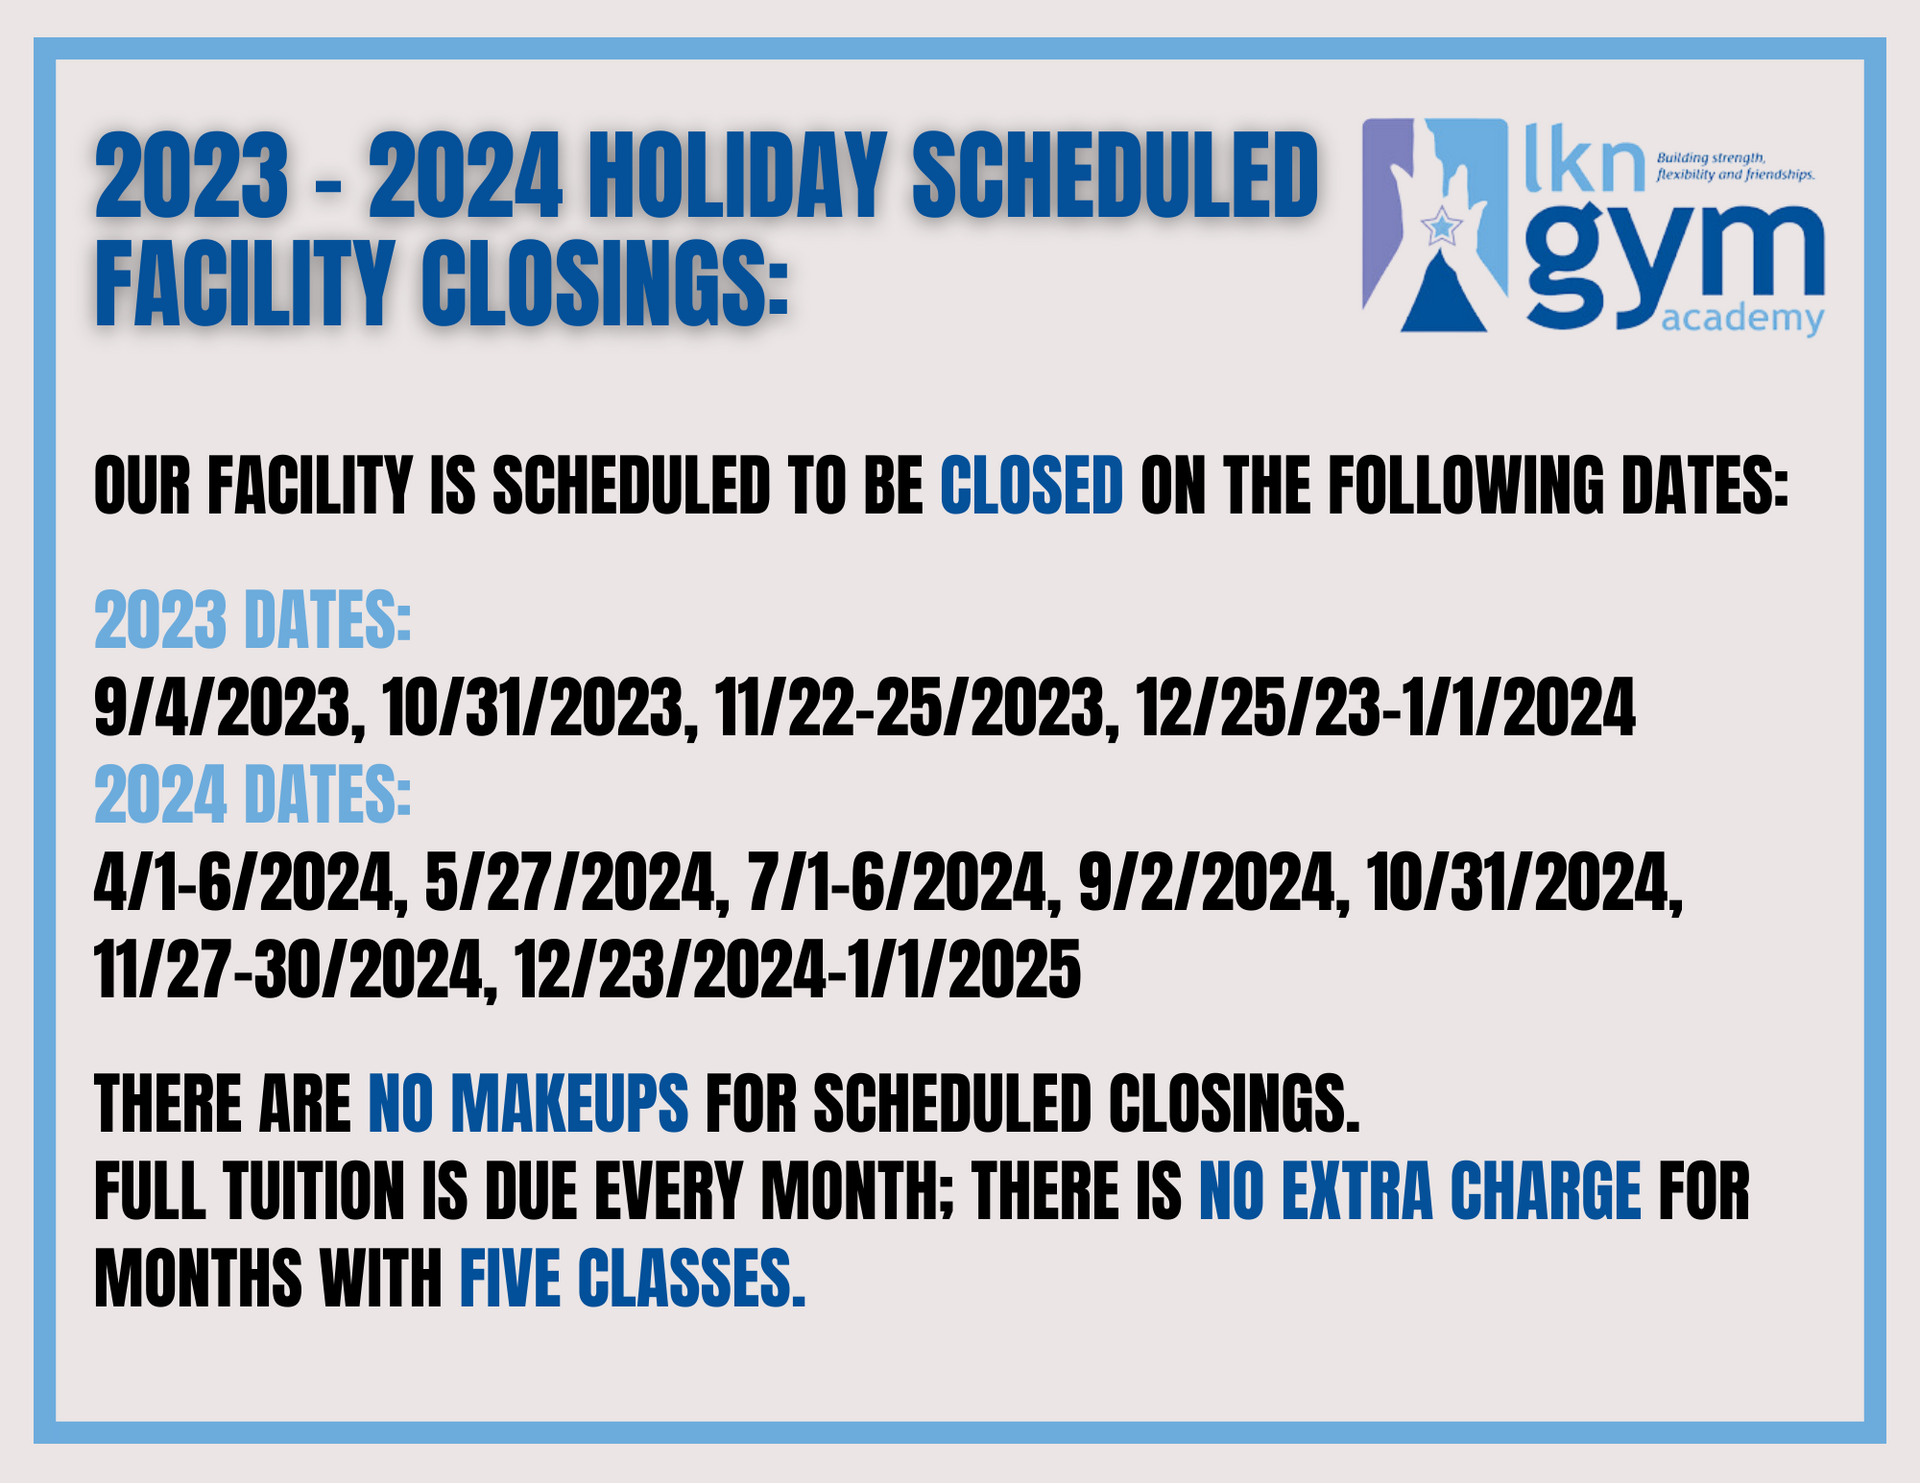 2023/2024 Holidays/Scheduled Facility Closings